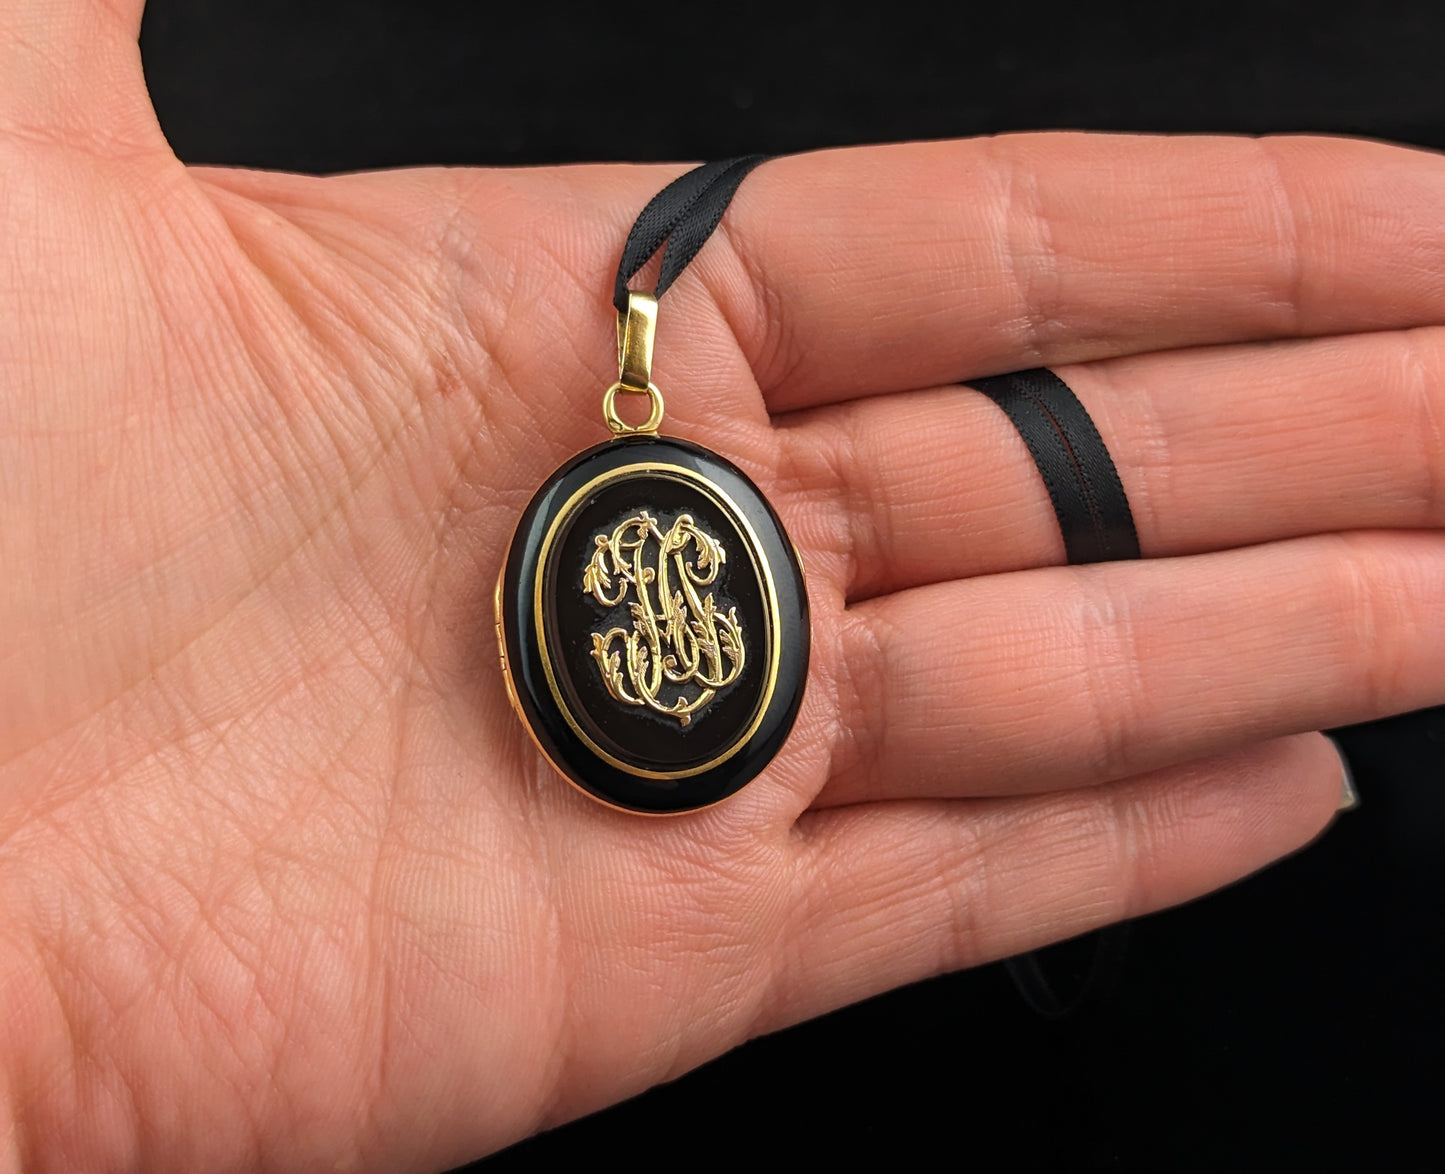 Antique French Mourning locket, Black onyx and 18ct gold, Remember